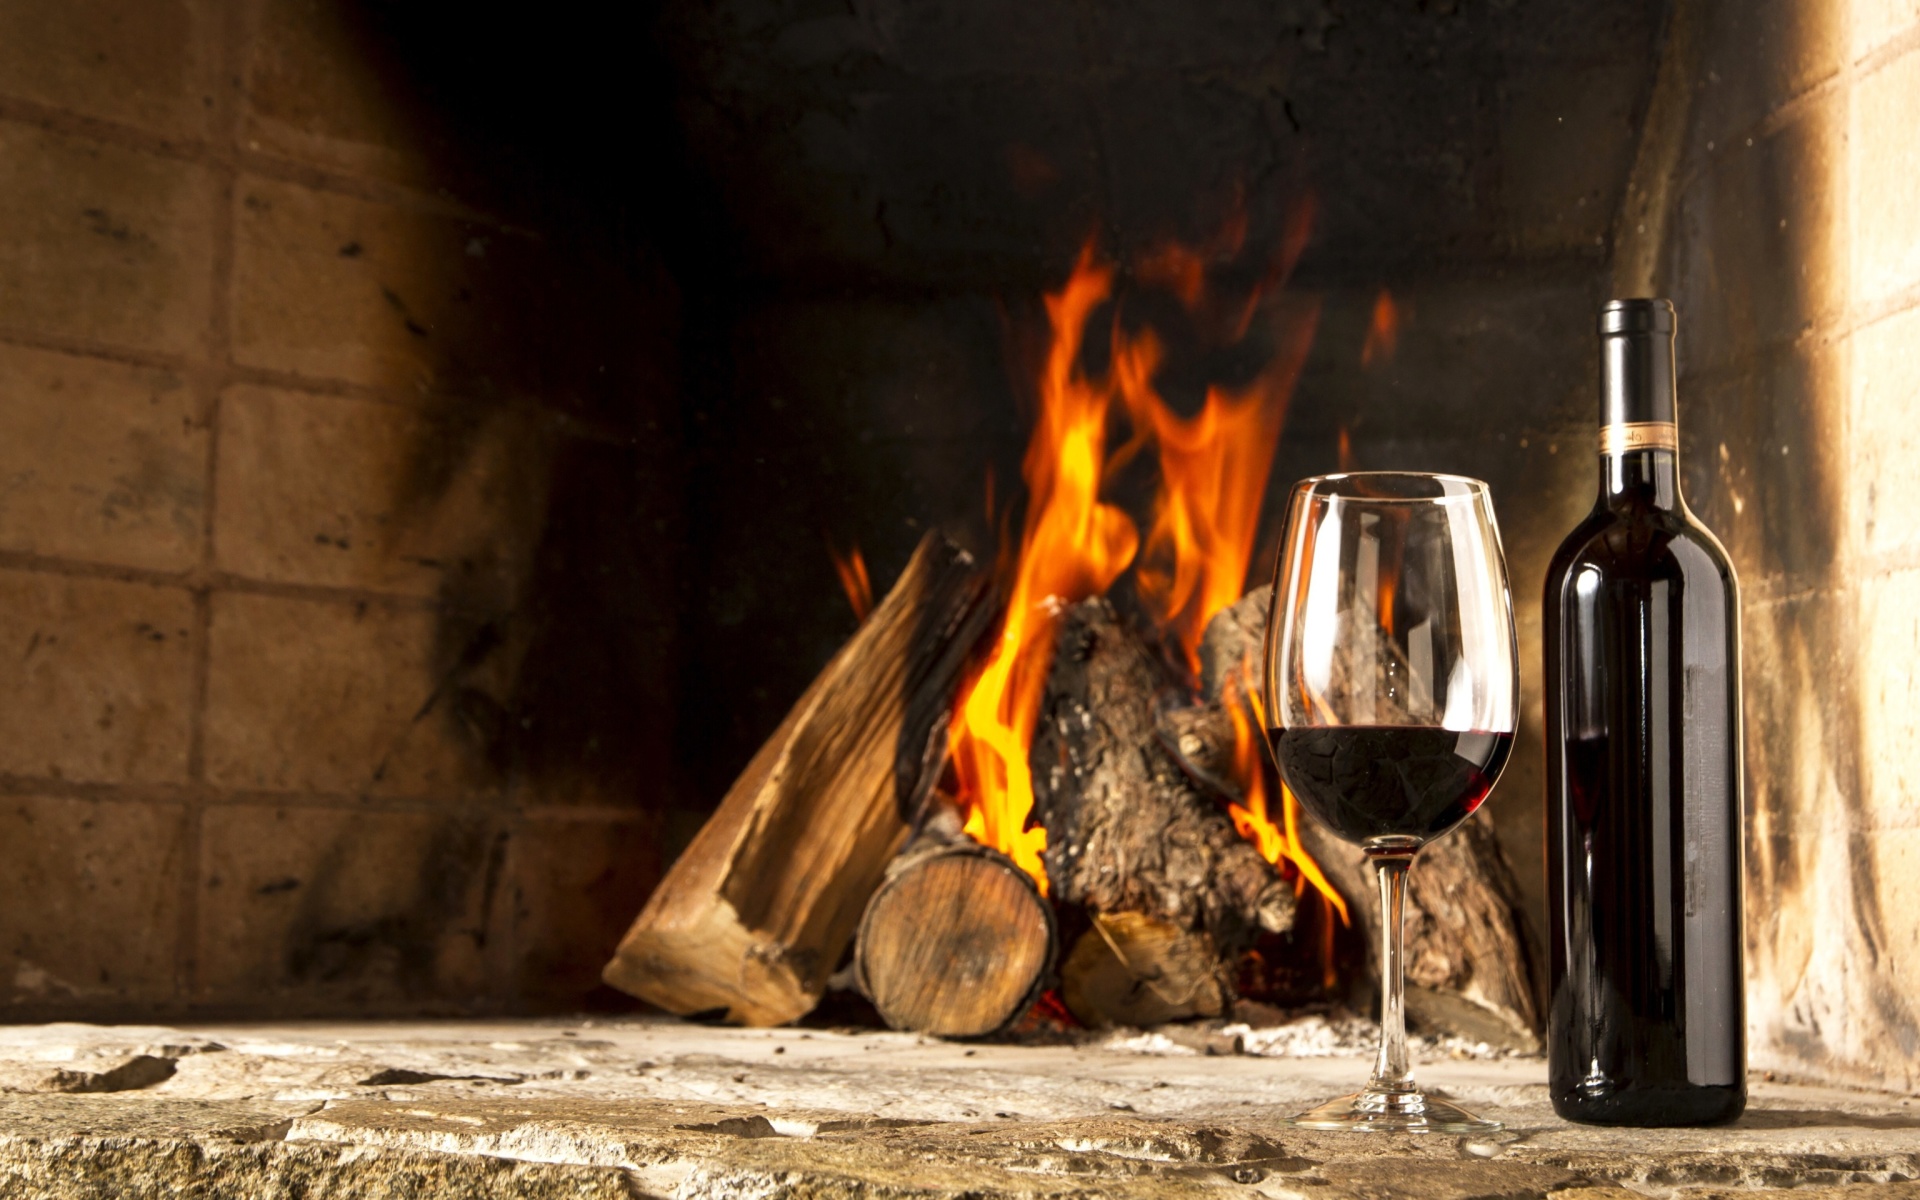 Wine and fireplace wallpaper 1920x1200